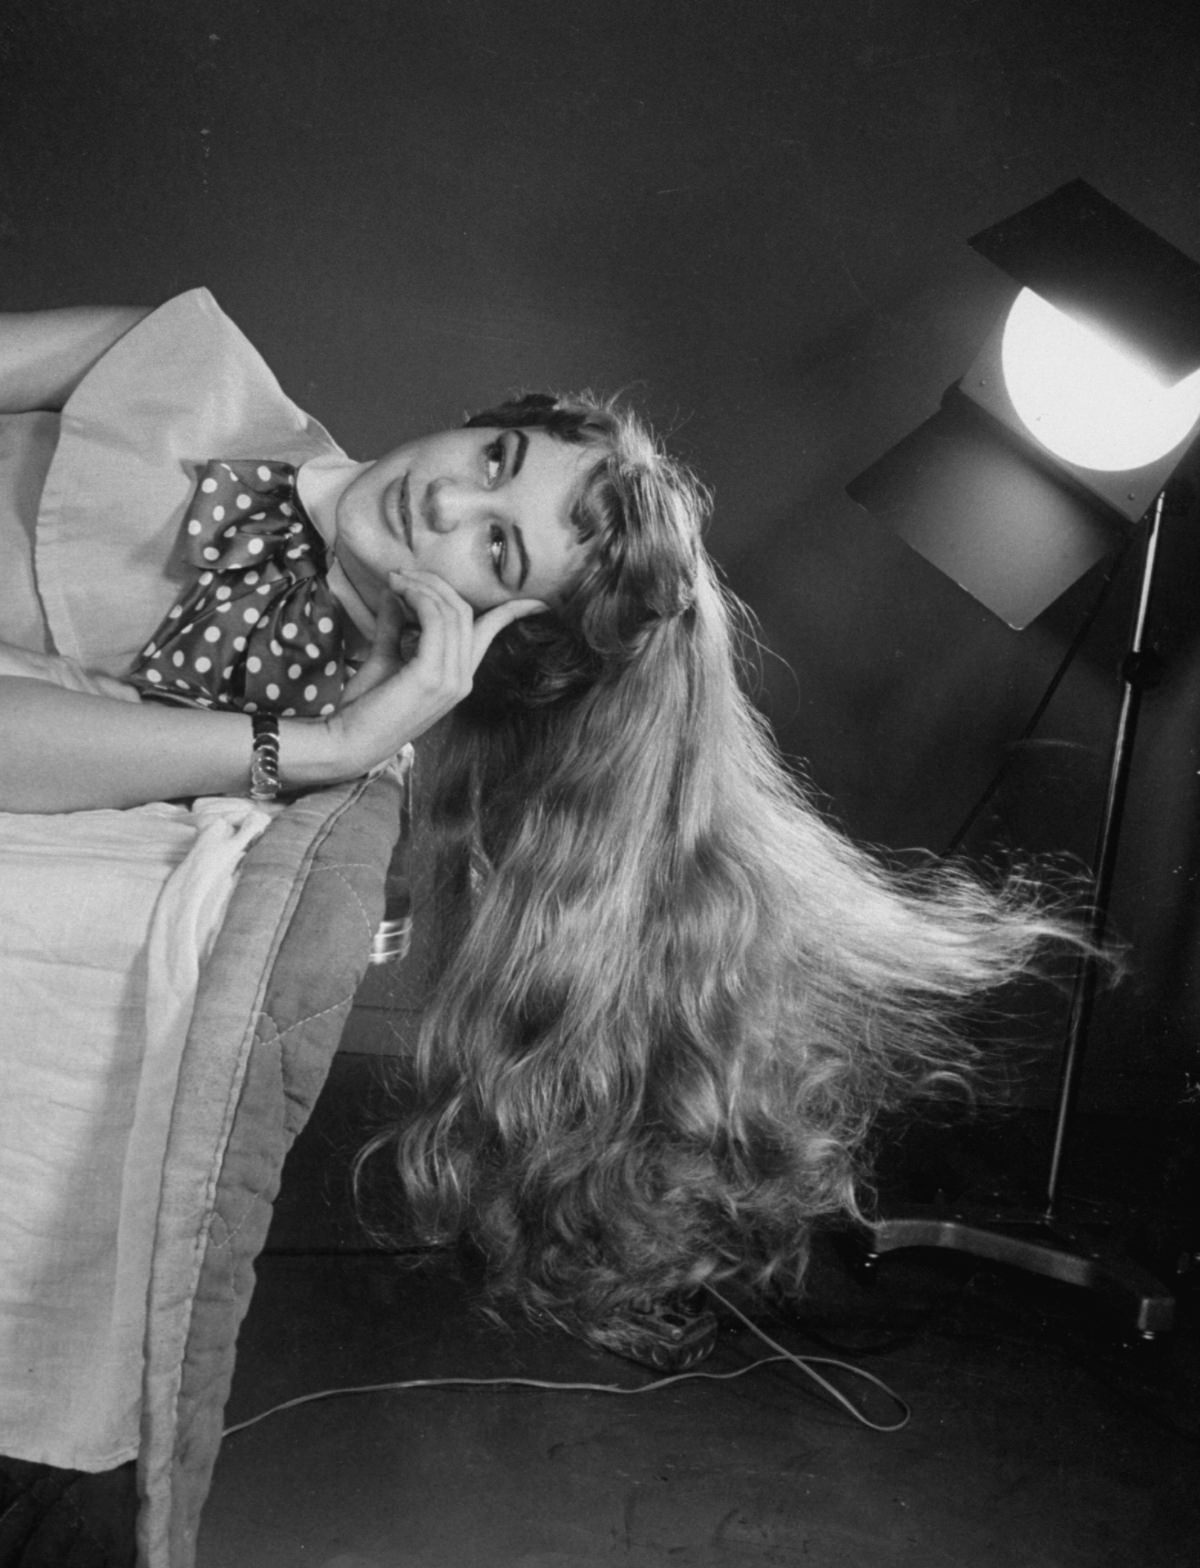 Baldy and the Long Hairs: Vintage Photos from the 1950s Casting Call for a Long-Haired Model